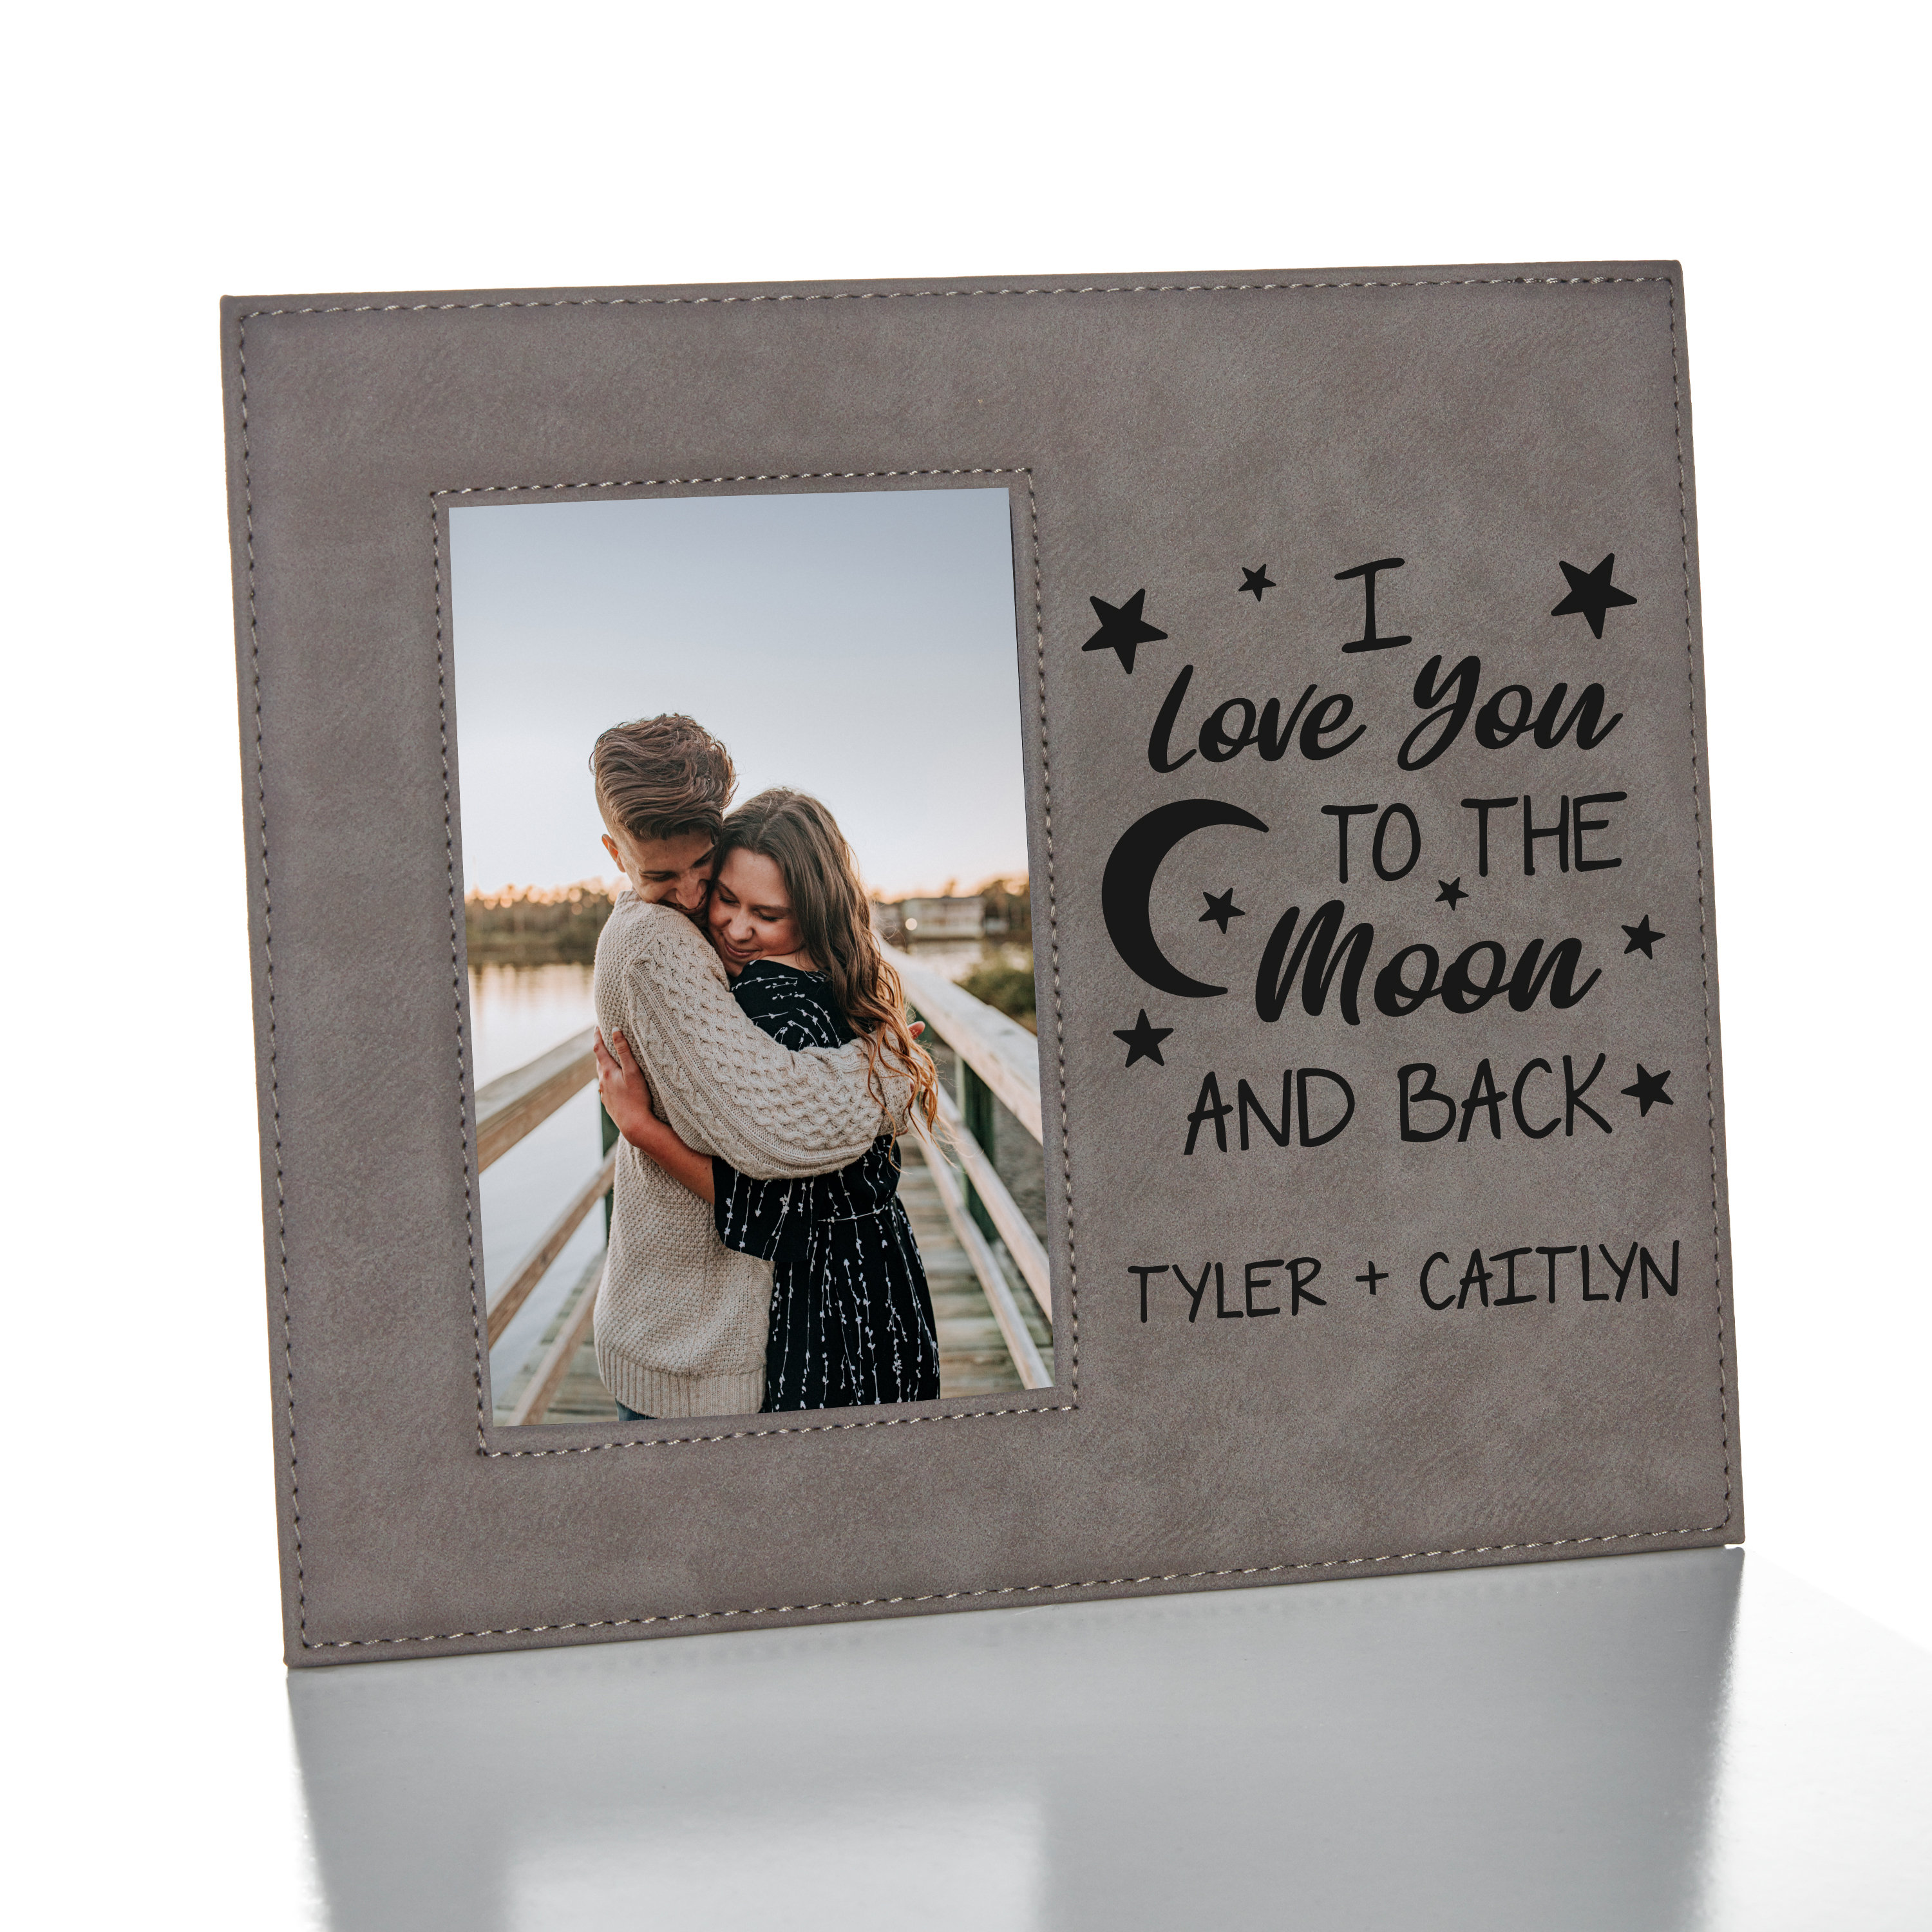 I LOVE YOU TO THE MOON AND BACK STARS & MOON Natural Oak Wooden MULTI PHOTO PICTURE CUBE Frame Romantic Gifts Presents for her him Valentines Mothers Day Birthday Christmas Boyfriend Girlfriend my Husband your Wife Wedding Anniversary Novelty Gift Present 